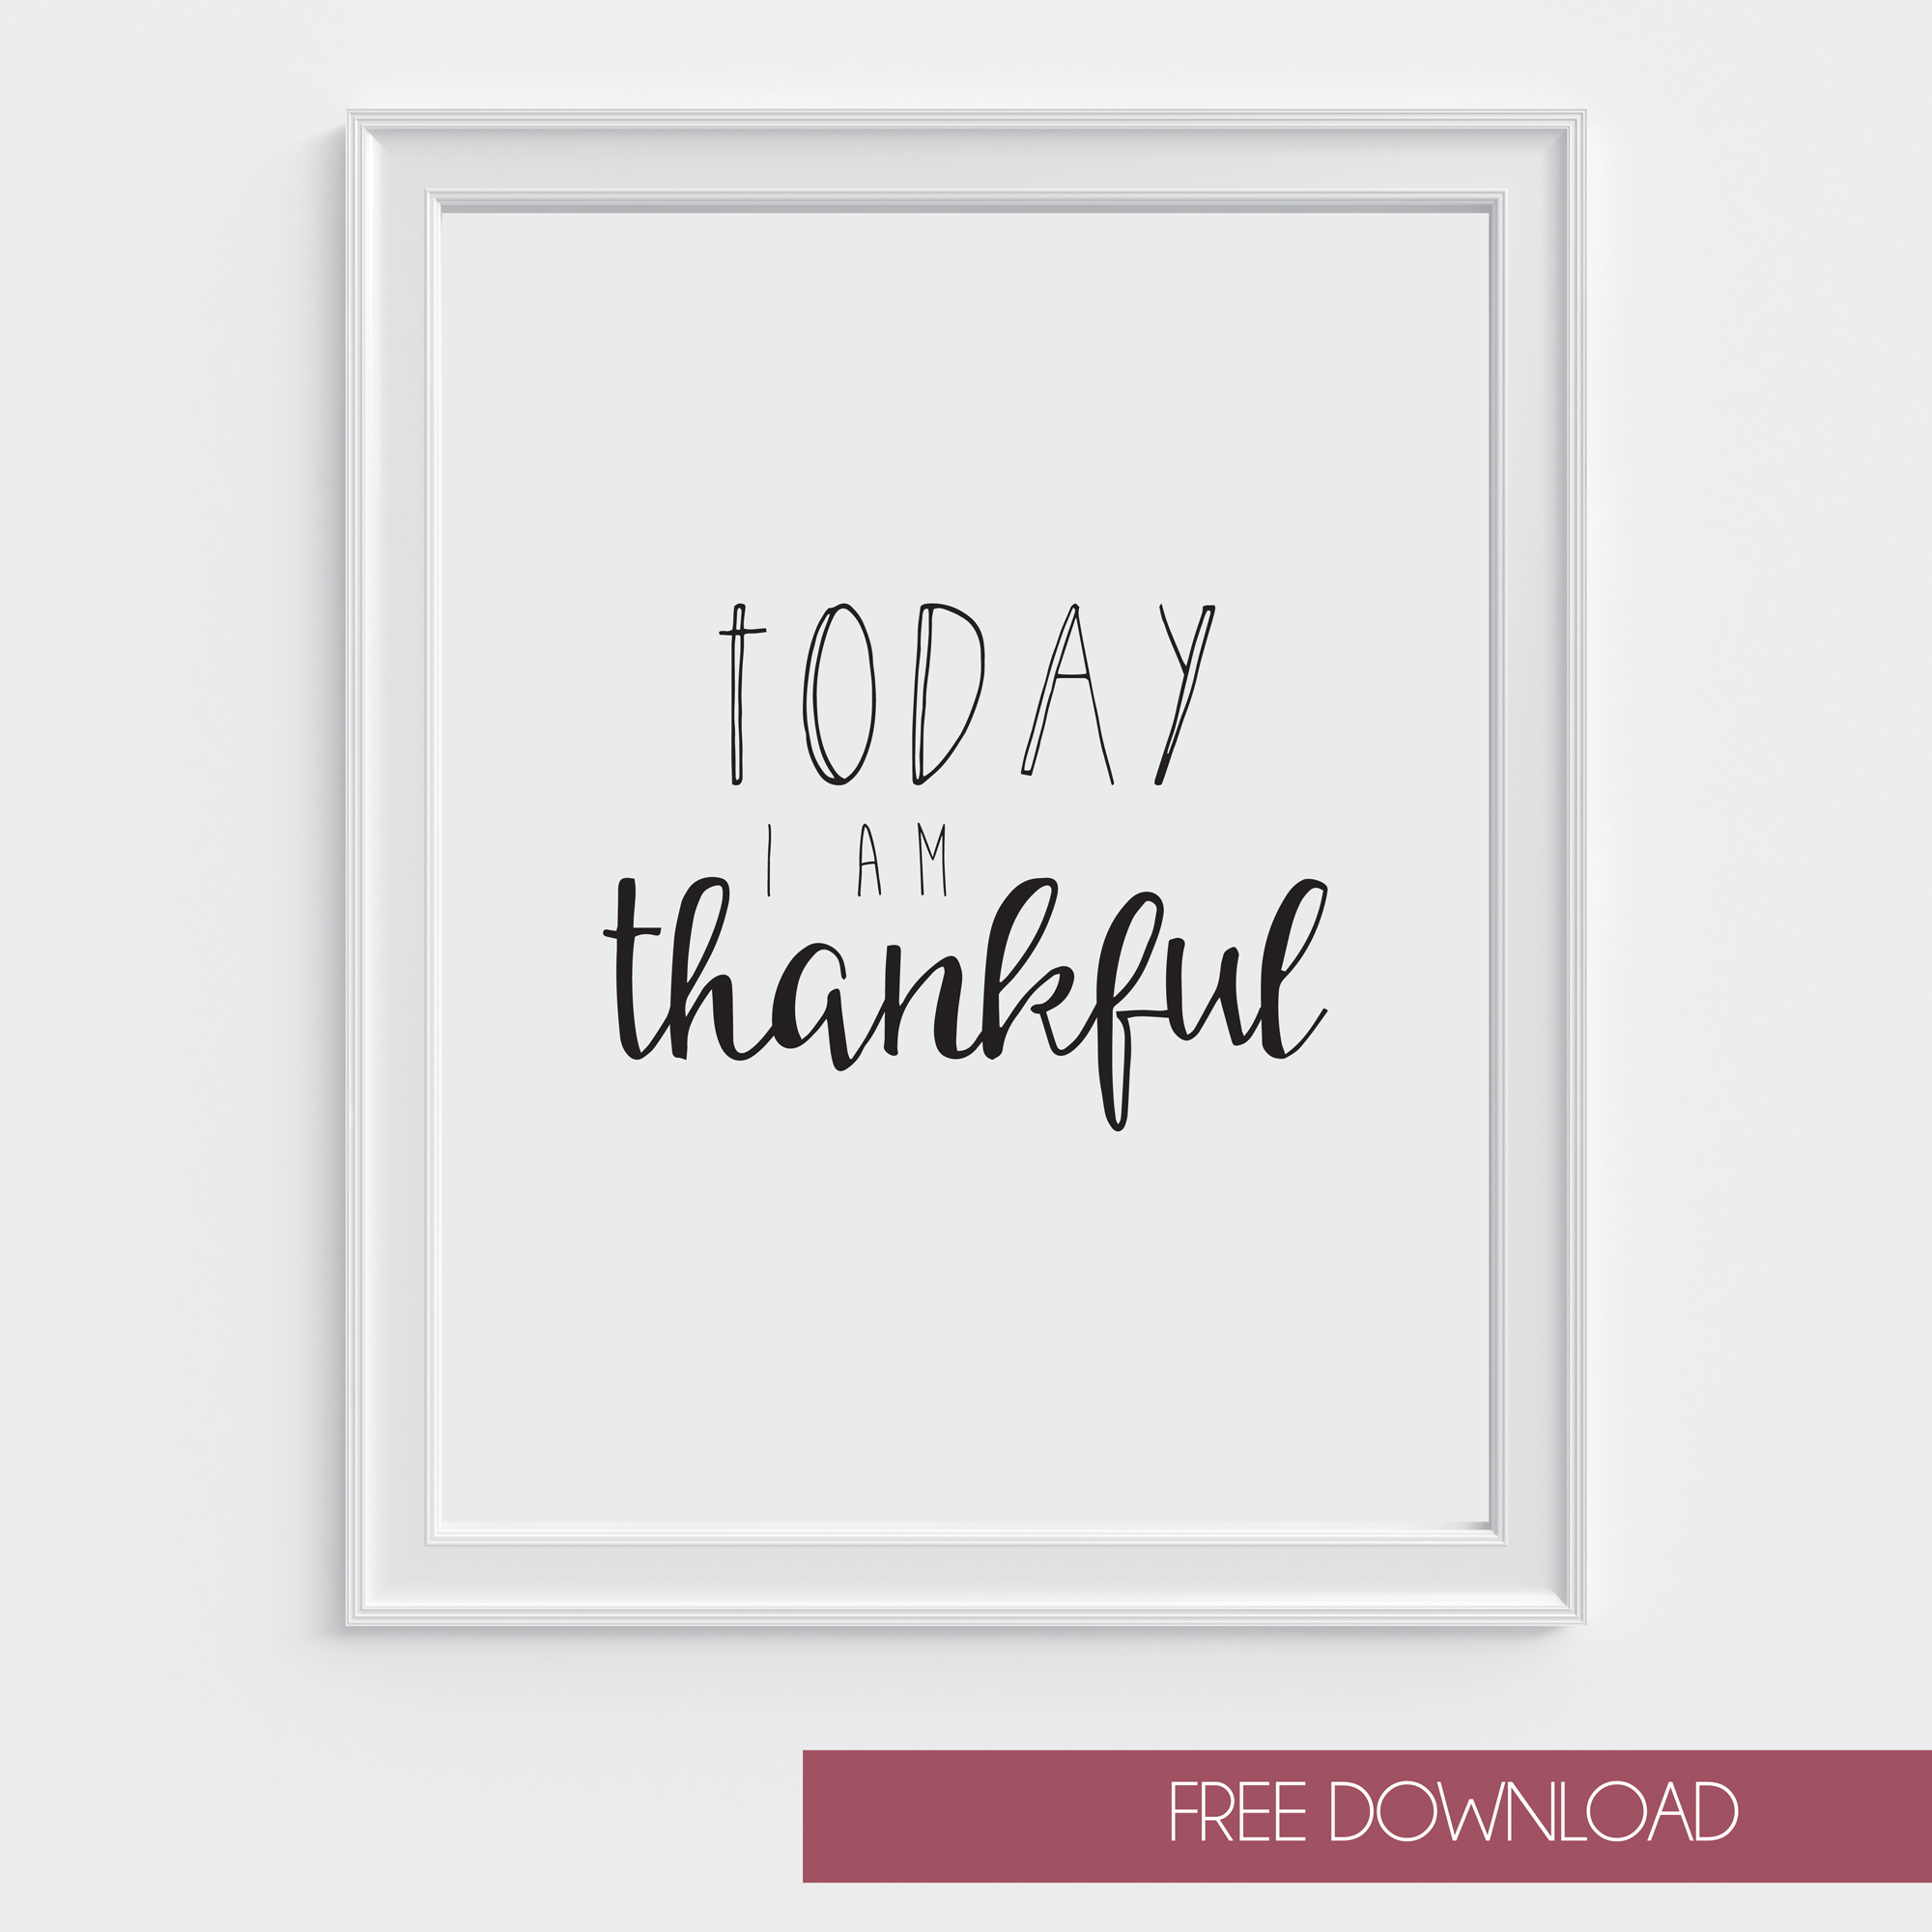 Today-I-Am-Thankful-Print-Framed-Free-Download